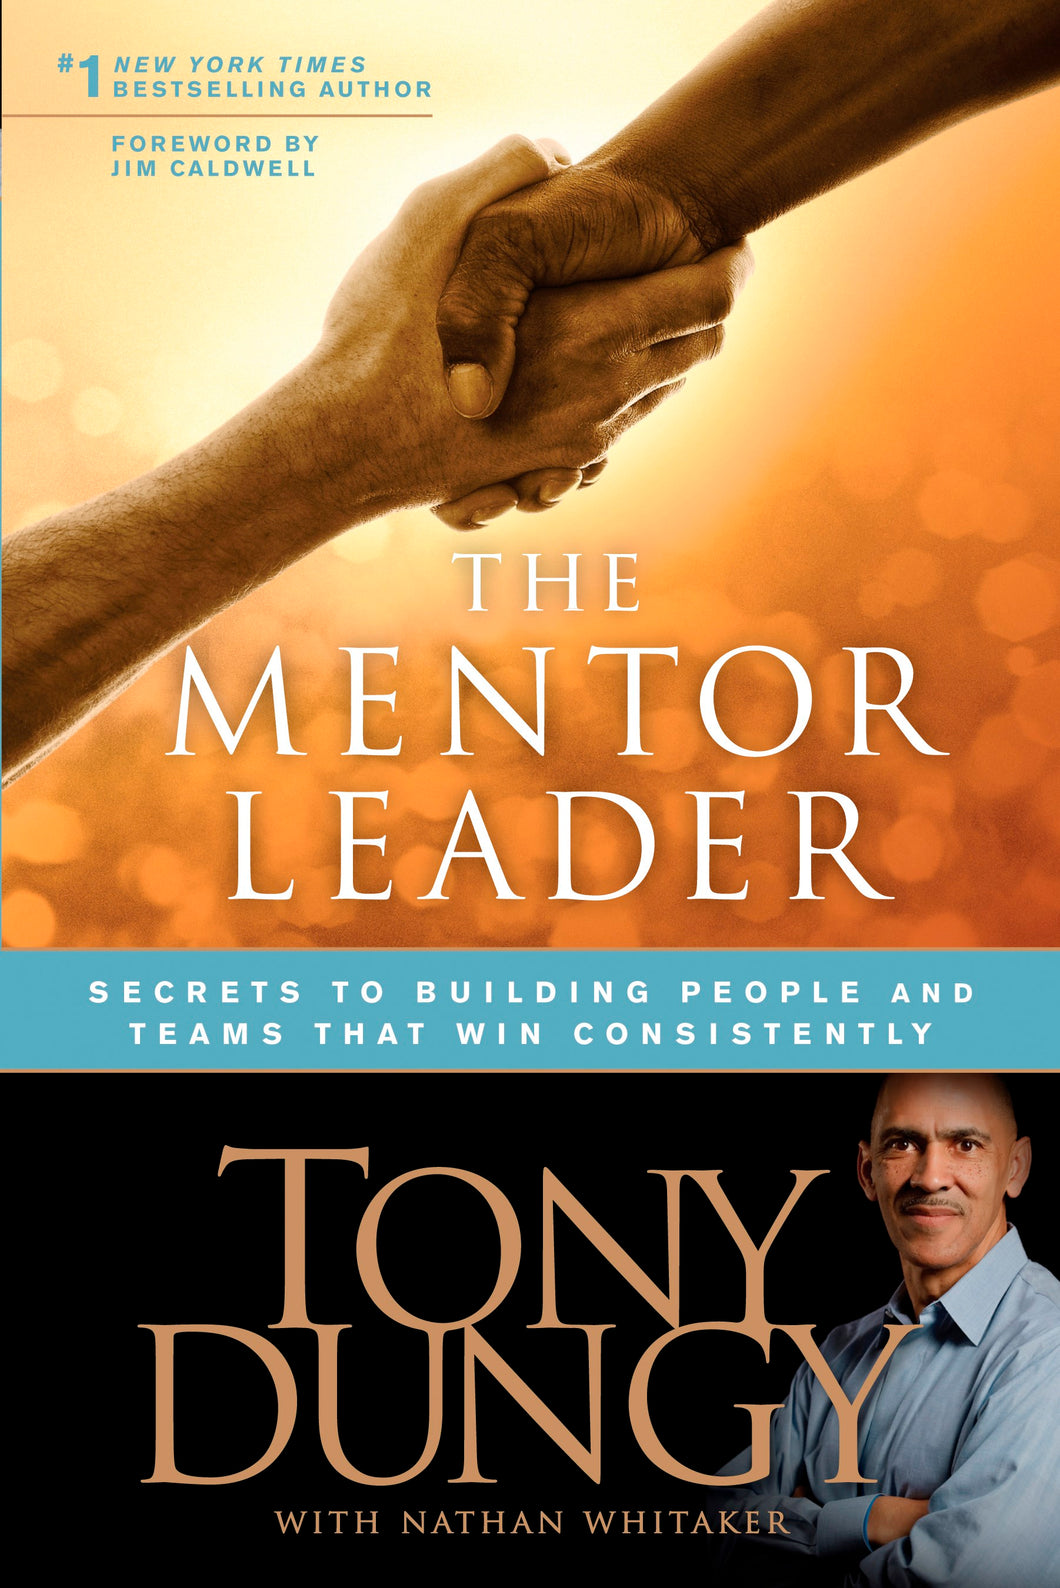 Mentor Leader-Softcover